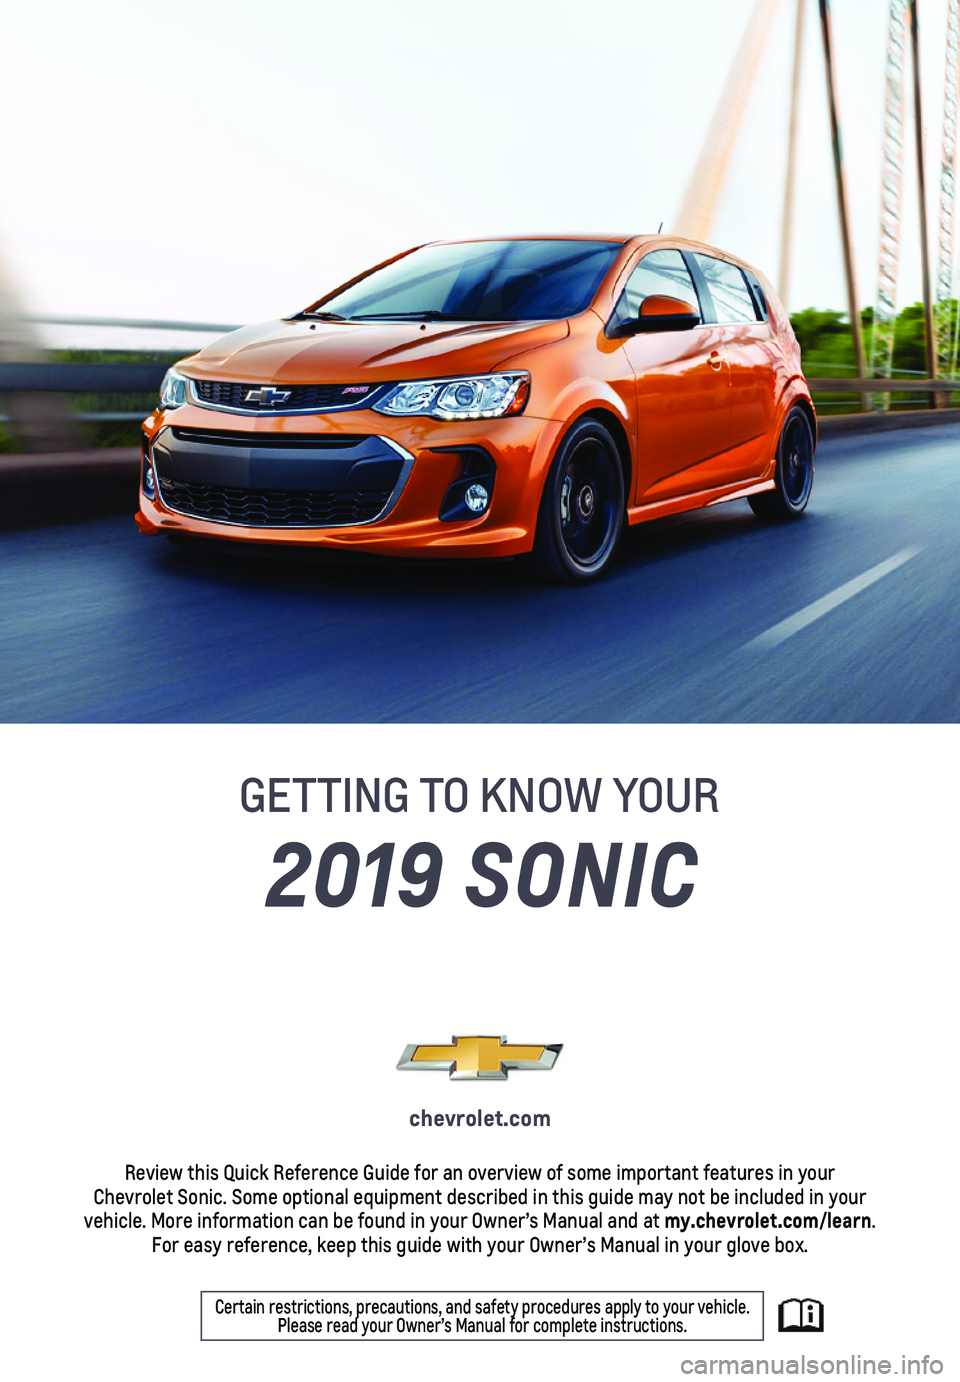 CHEVROLET SONIC 2019  Get To Know Guide 1
2019 SONIC
GETTING TO KNOW YOUR
chevrolet.com
Review this Quick Reference Guide for an overview of some important feat\
ures in your  Chevrolet Sonic. Some optional equipment described in this guide